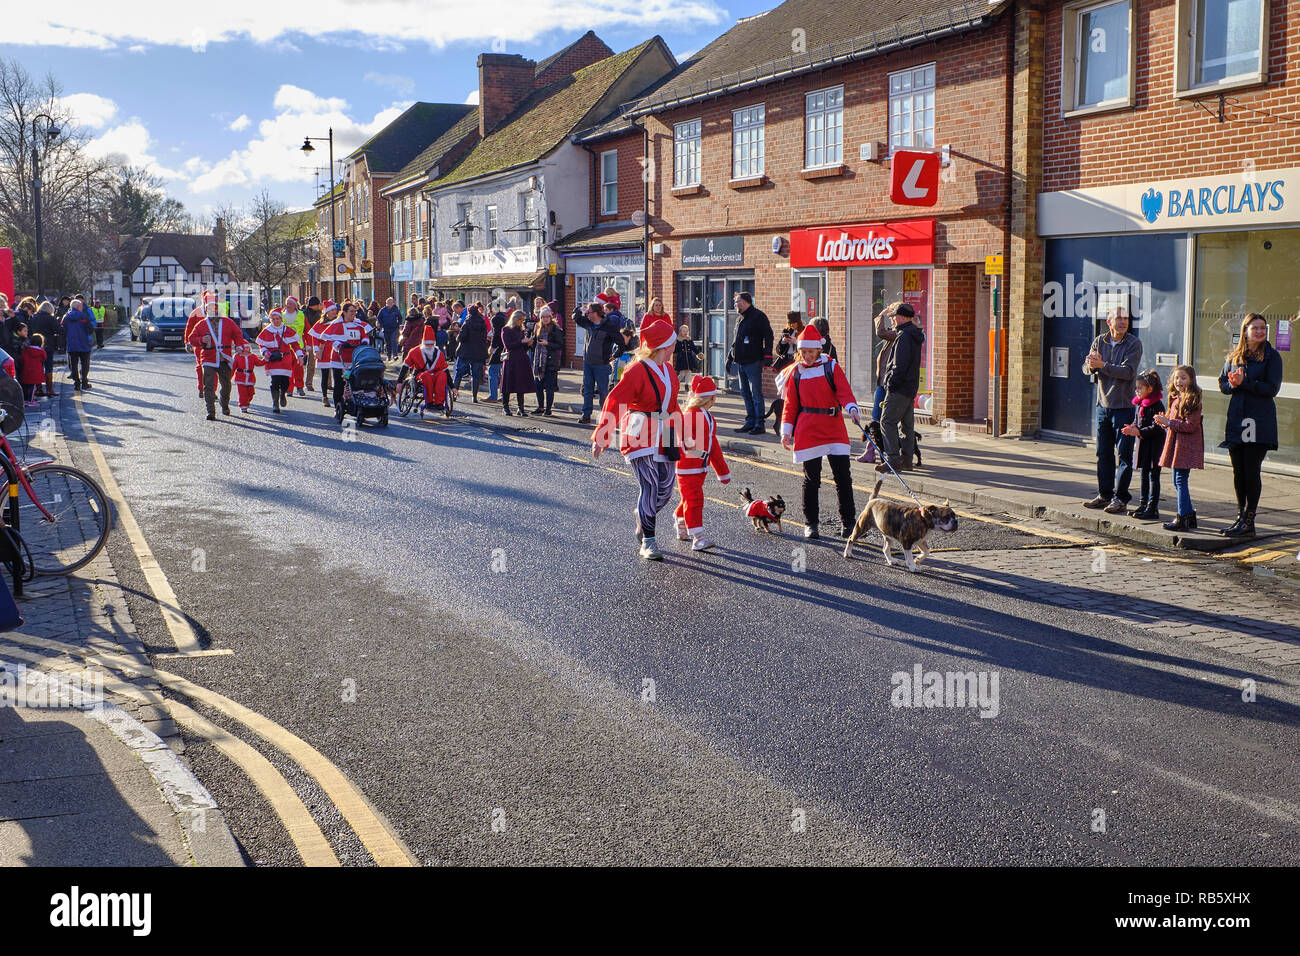 People dressed as Santa Claus and their dogs taking part in the Great Thatcham Santa Fun Run in Thatcham high street while people watch on Stock Photo